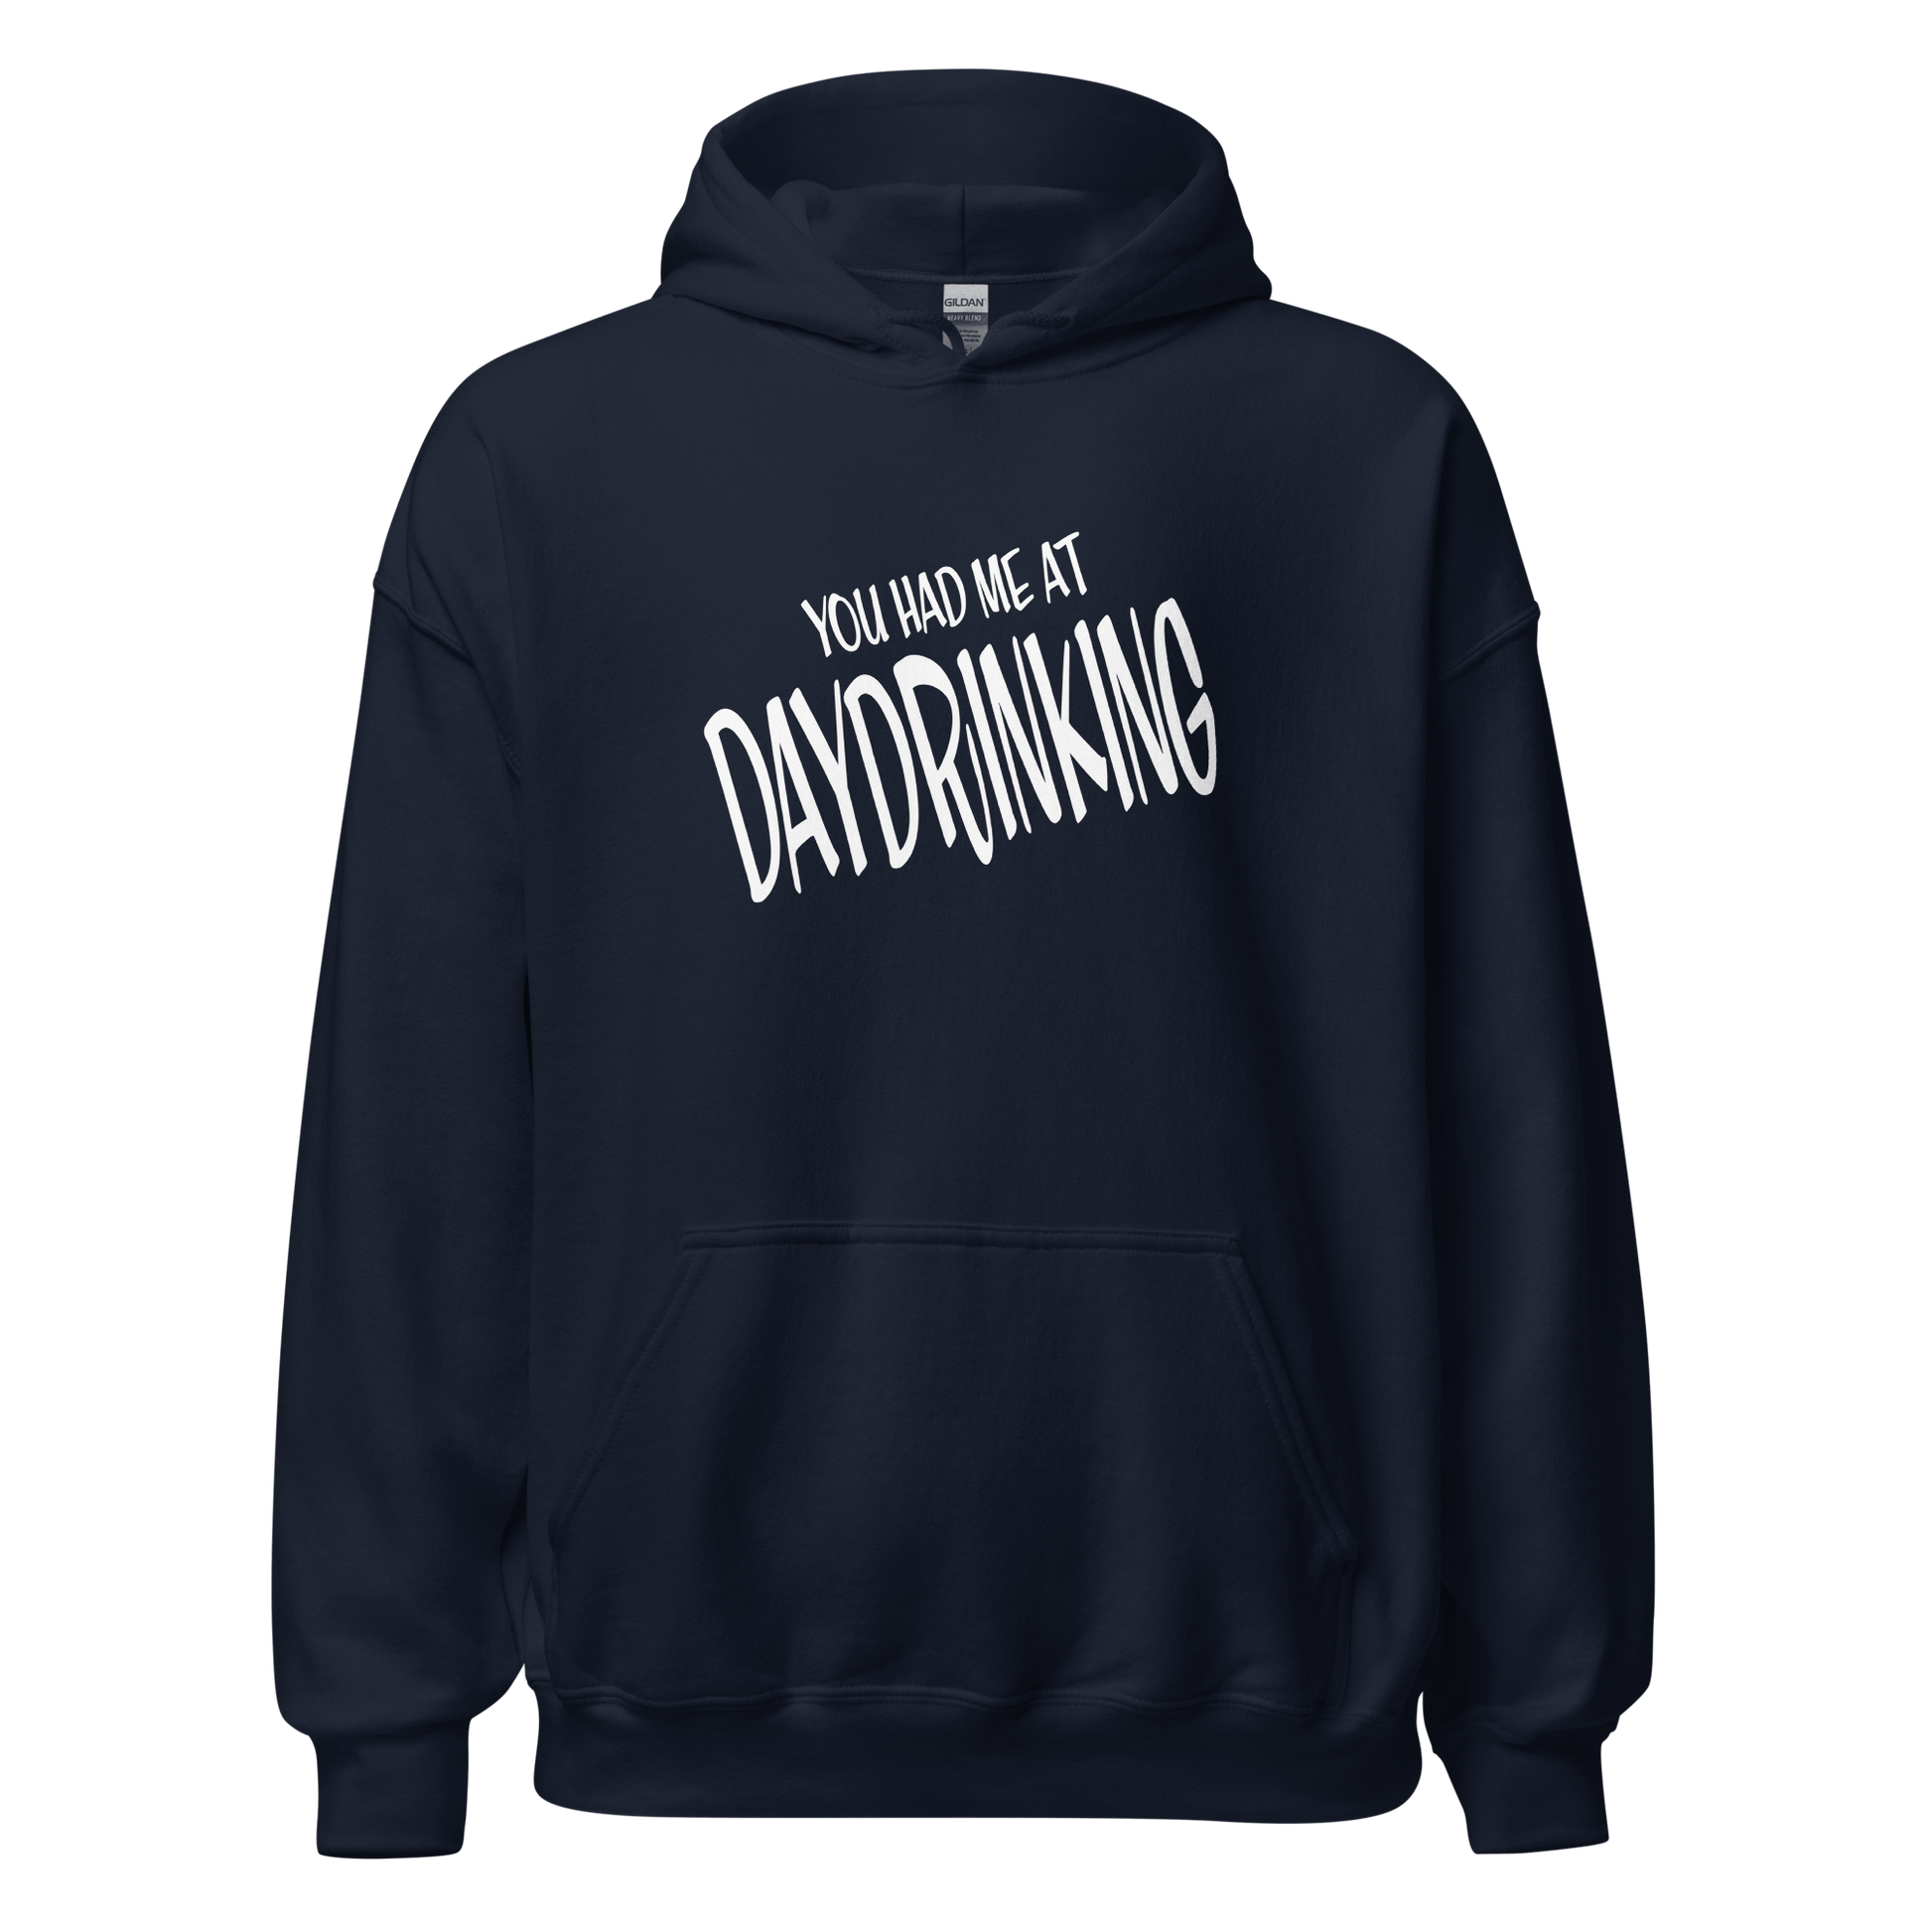 You Had Me at Daydrinking Hoodie - Perfect for Cool Evenings DRINKING,HOODIE,MENS,New,SPRING BREAK,UNISEX,WOMENS Dayzzed Apparel